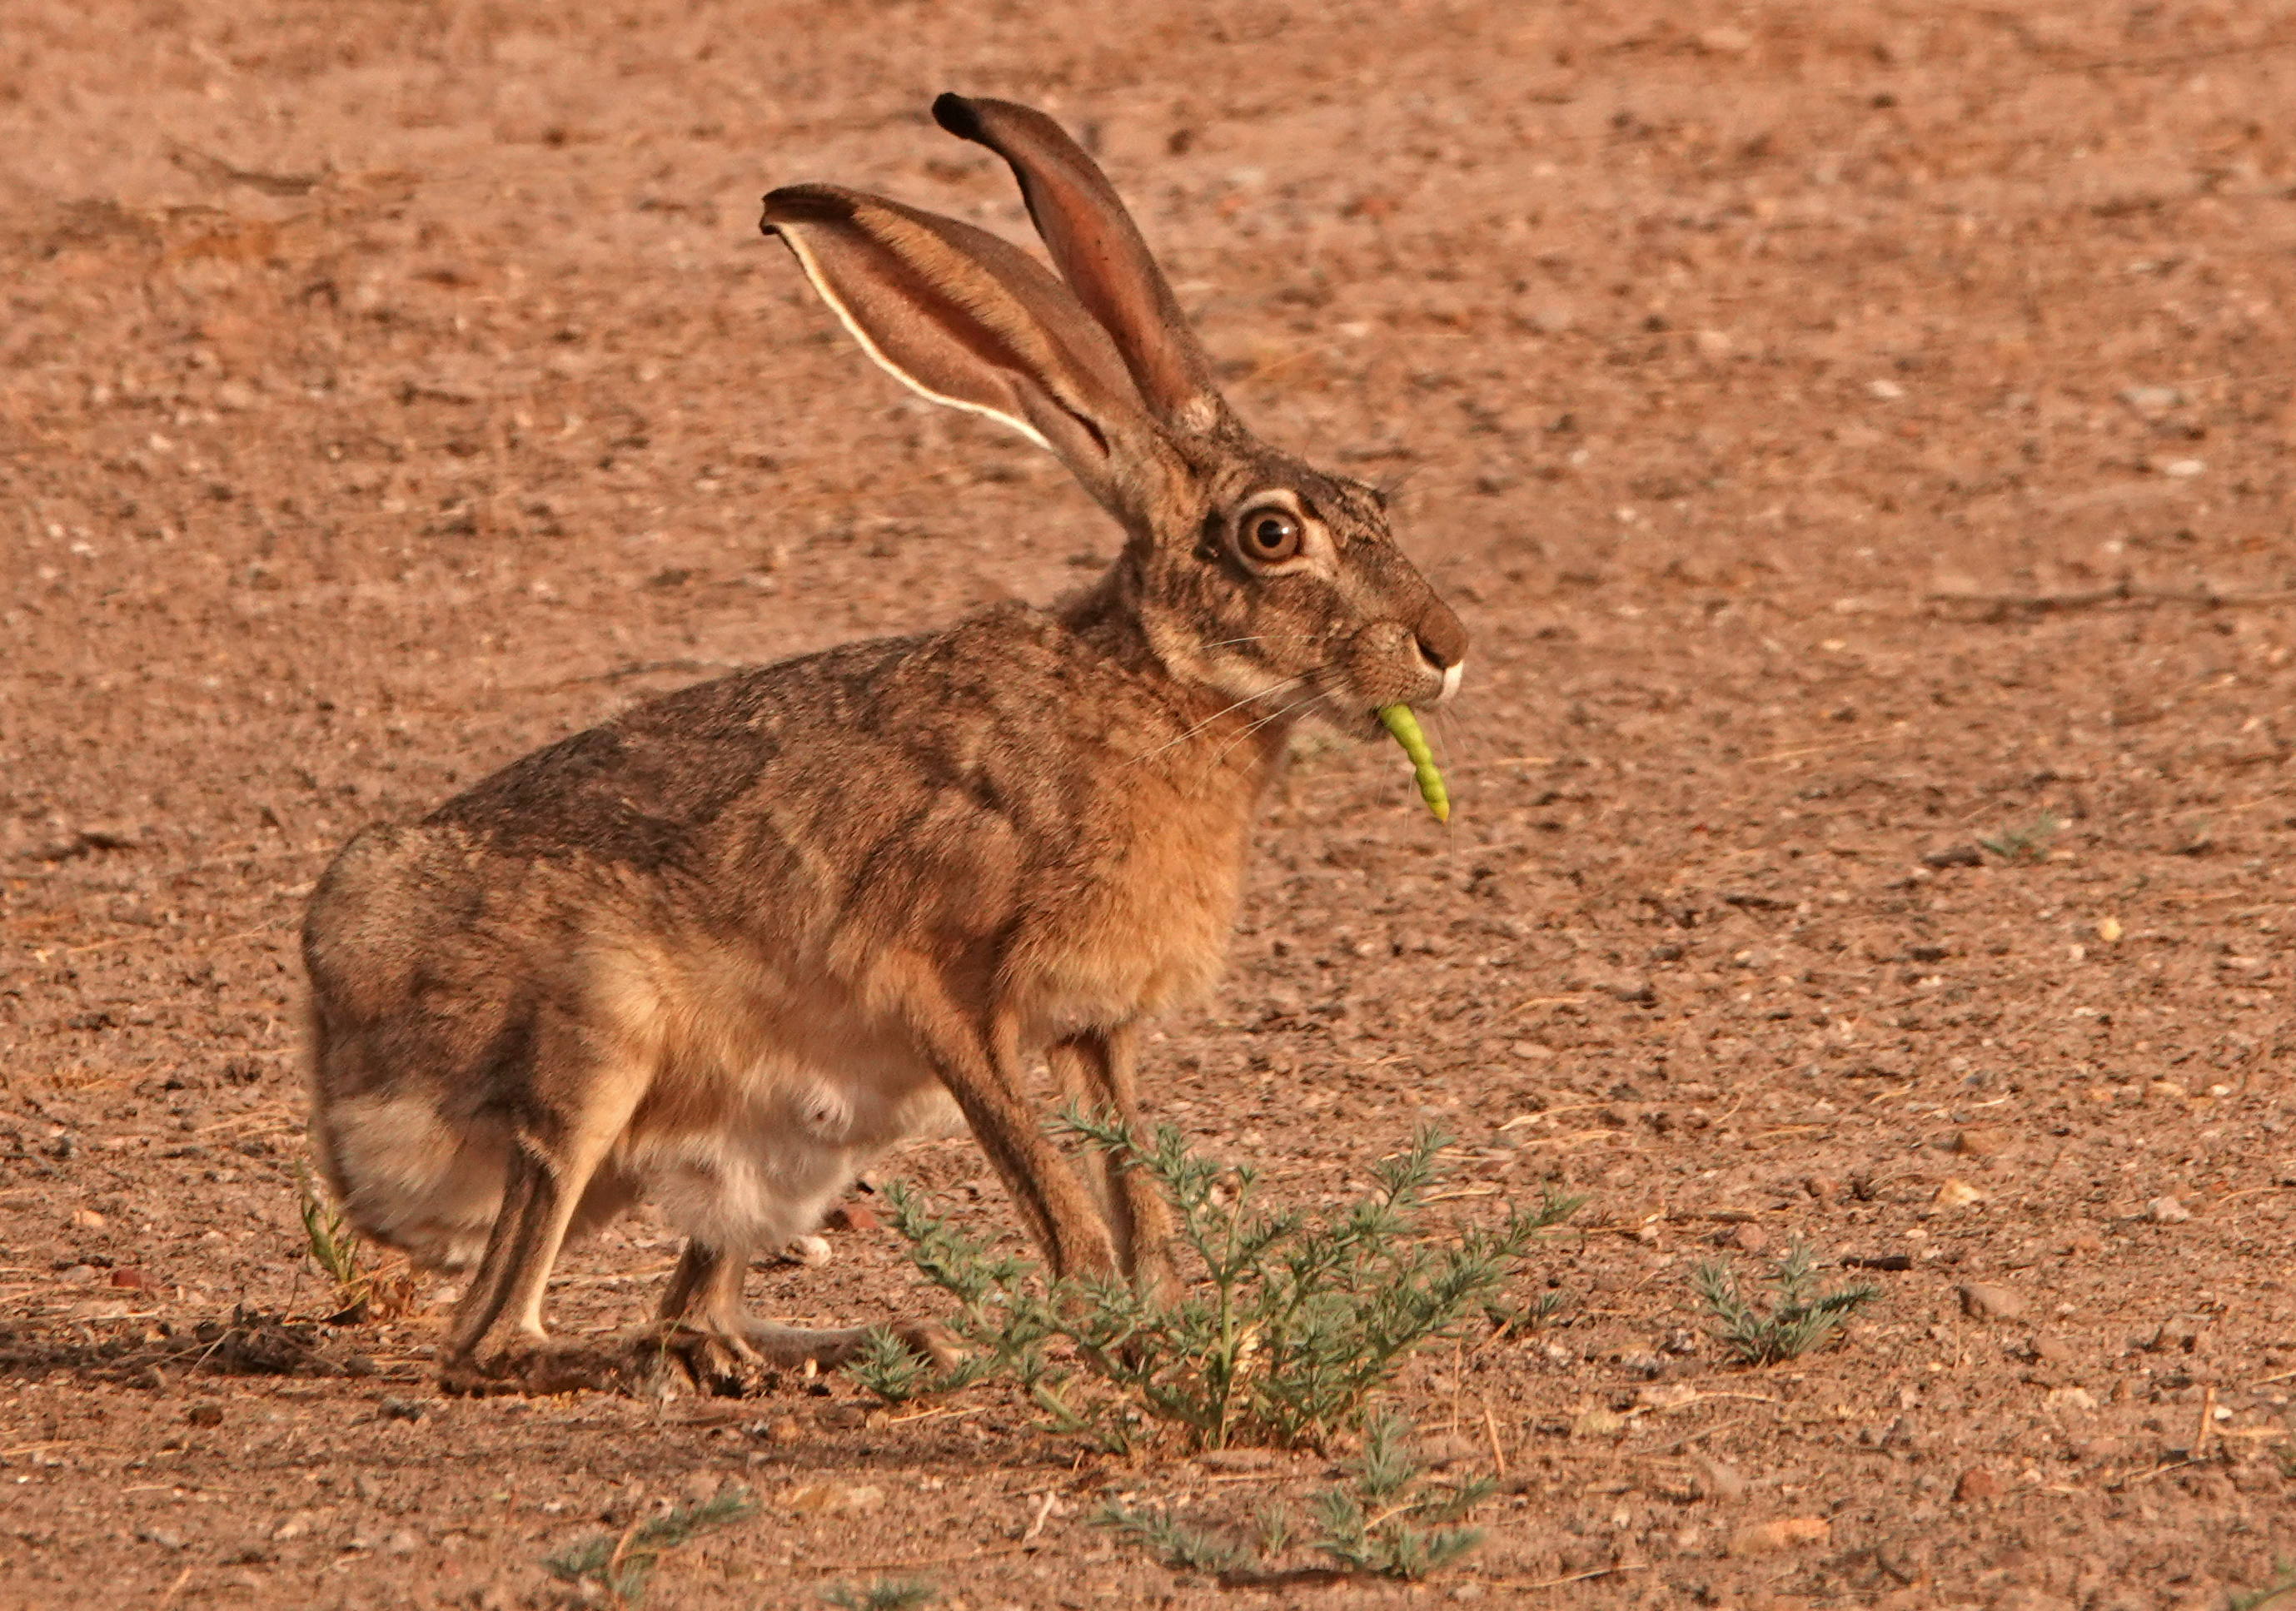 Photo by Diane Drobka  |  Usually when I see jackrabbits, they are busy darting away and not posing like this female Black-tailed Jackrabbit. I made a brief stop to snap this photo from my truck window so that I didn't disturb her. I had never seen a lactating jackrabbit before so I was especially thrilled. The bright green mesquite pod "cigar" in her mouth was an added bonus!